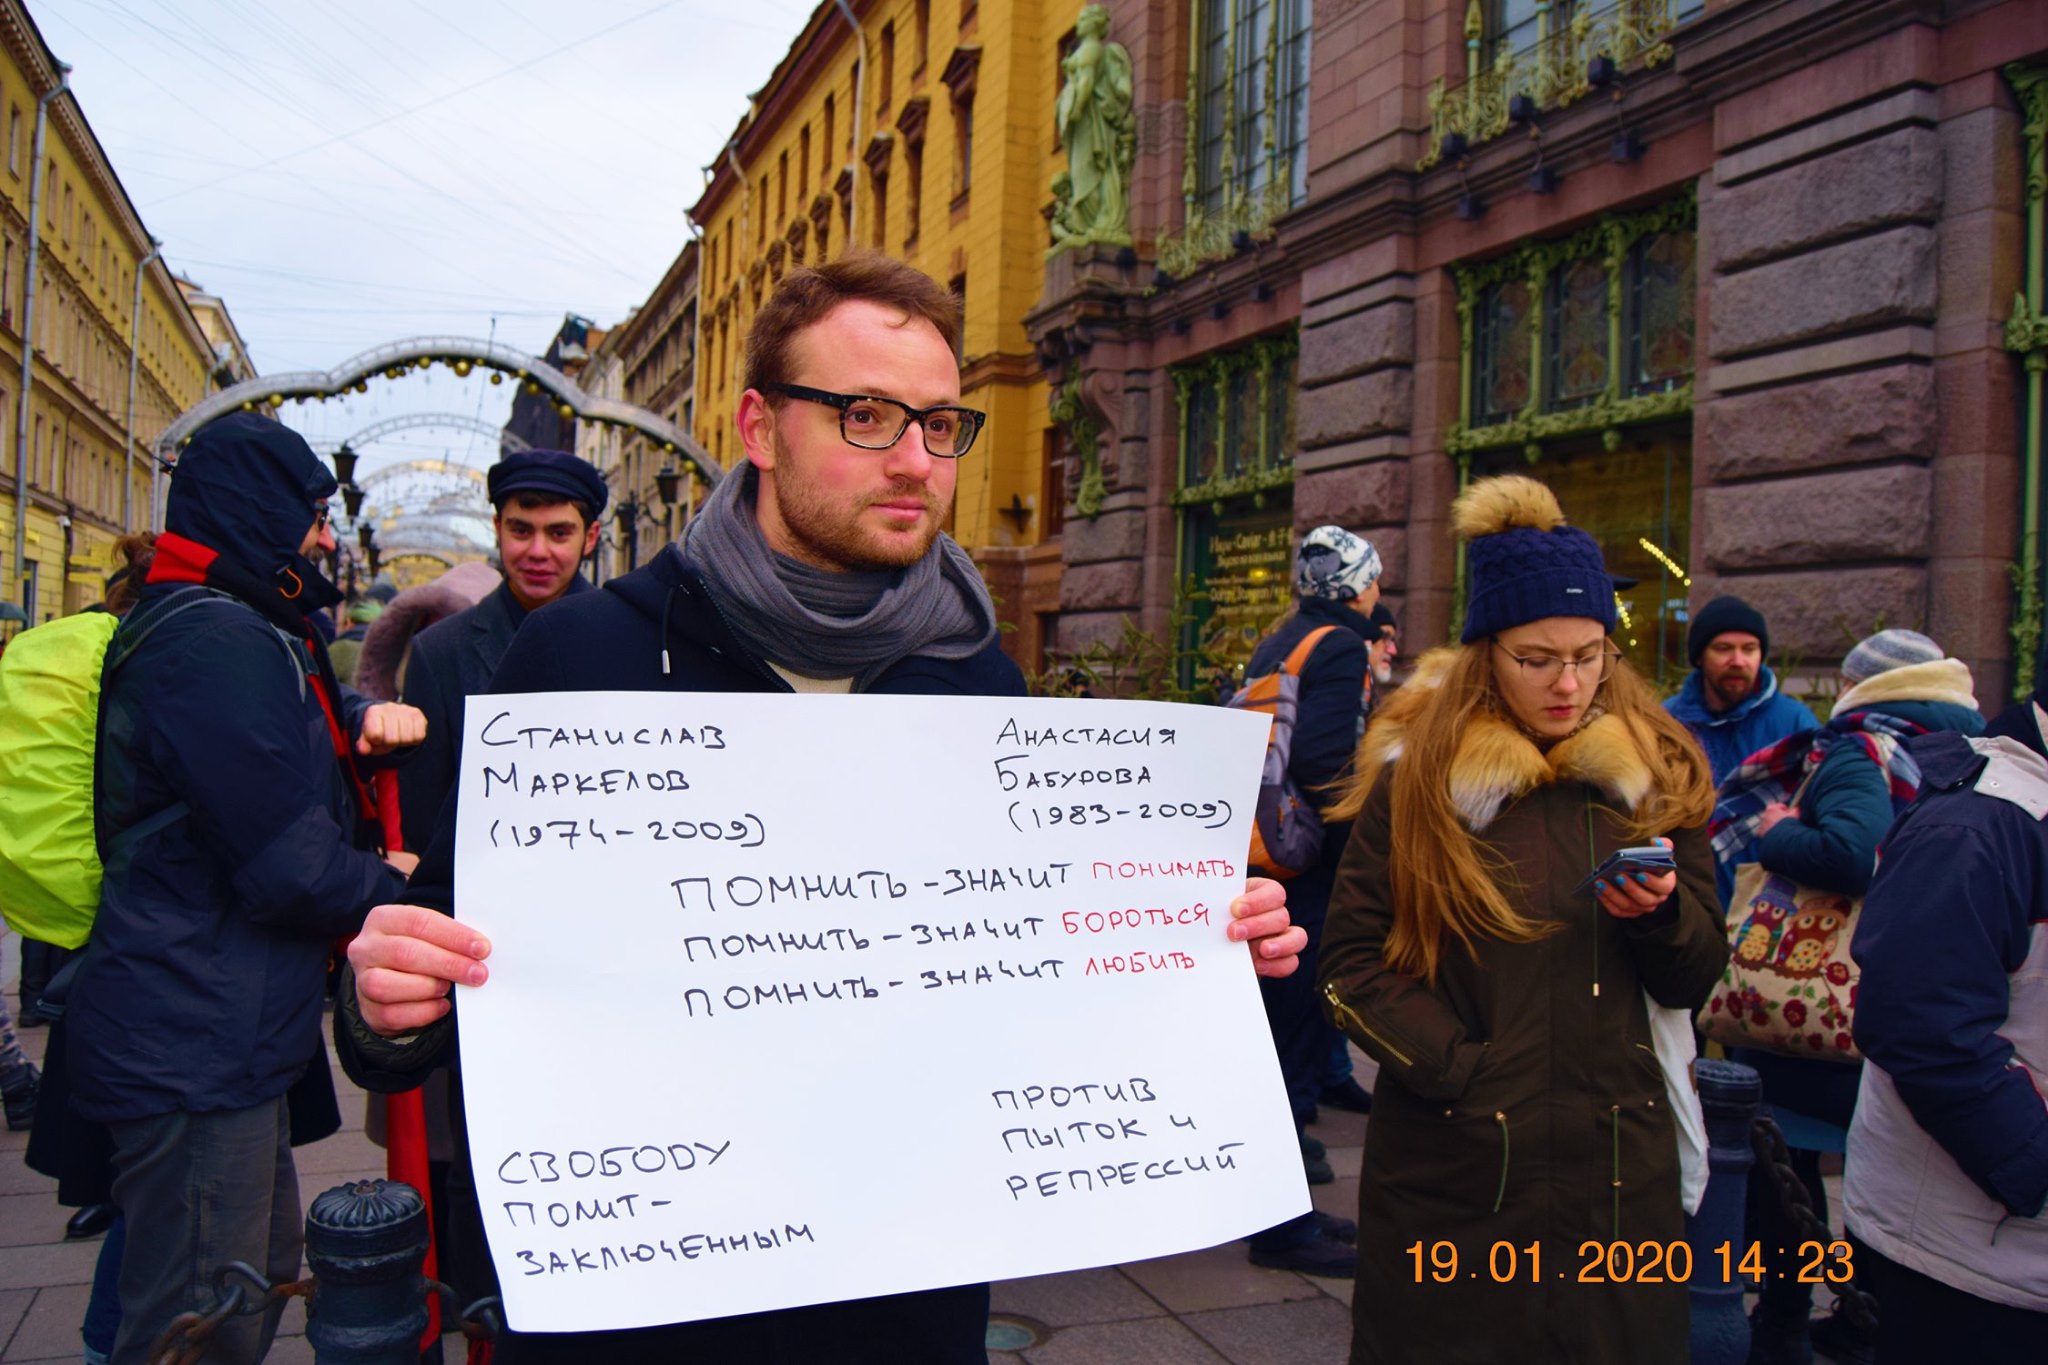 Ilya Matveev holds a sign written in Russian at a protest in a photo dated 2020